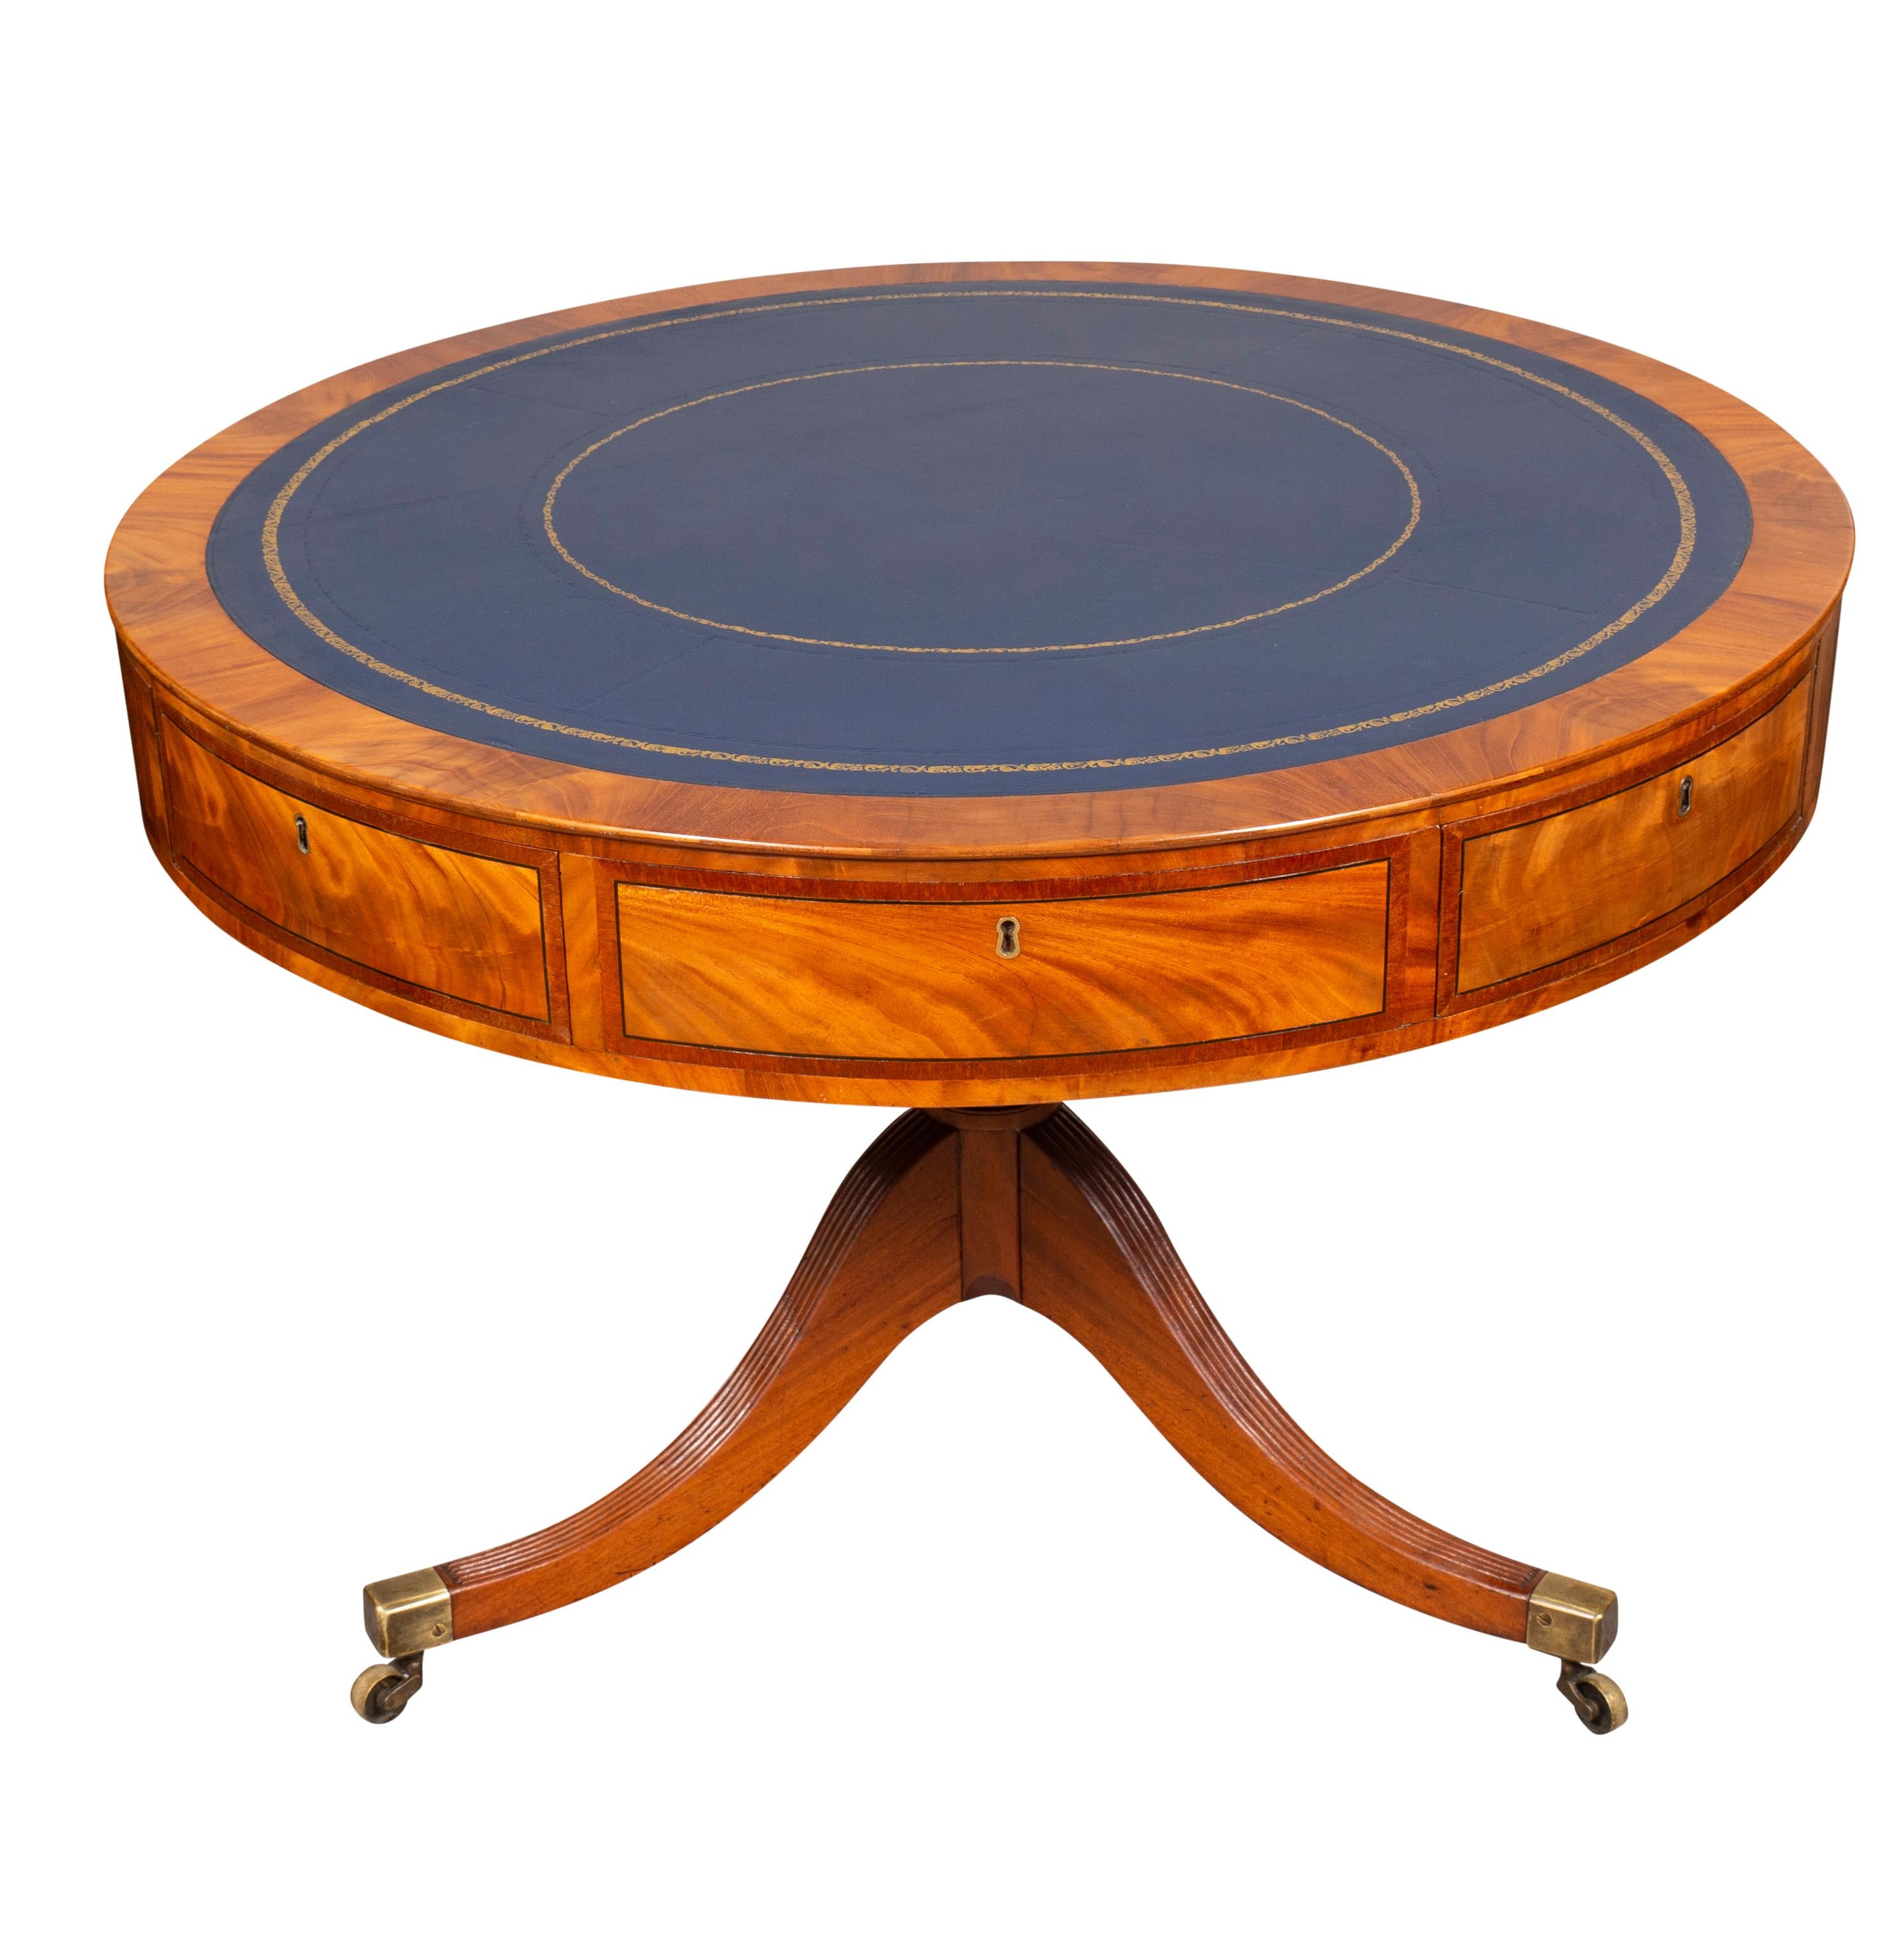 Circular with blue leather top with cross banded edge. The frieze containing drawers, all on a turned supported joining three reeded saber legs with casters.